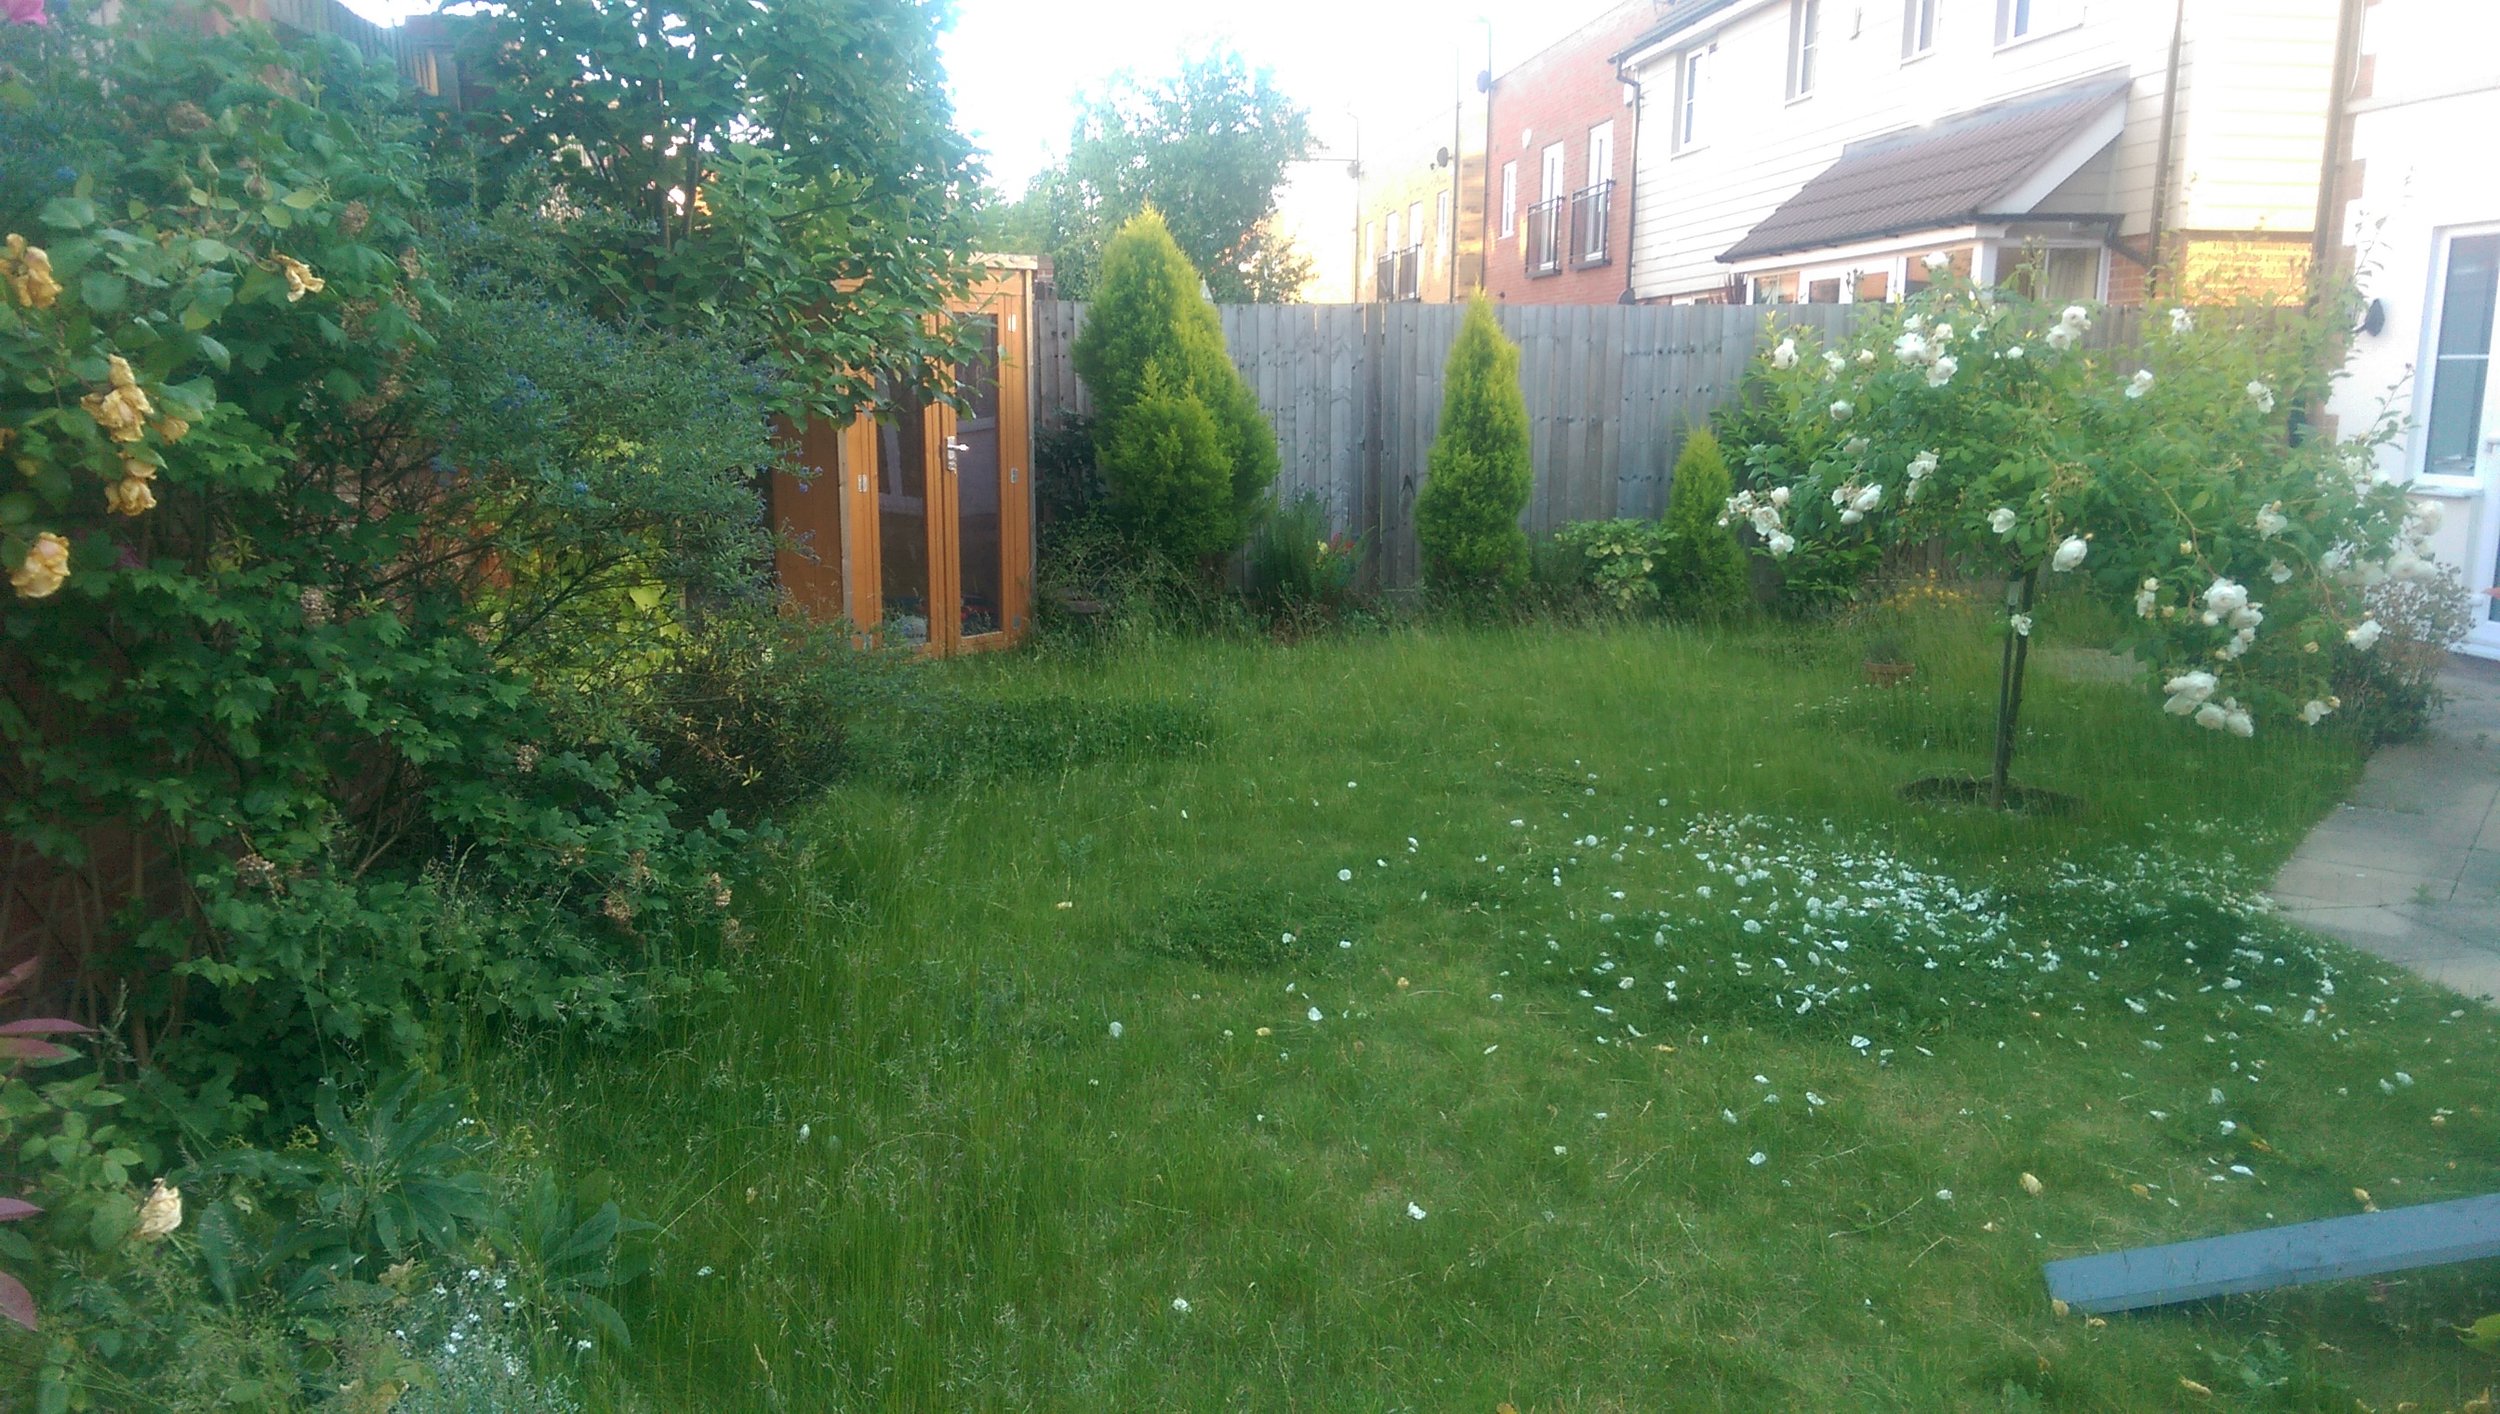 N E Gardencare Landscaping and Gardening in South East London Club Card 10.jpg